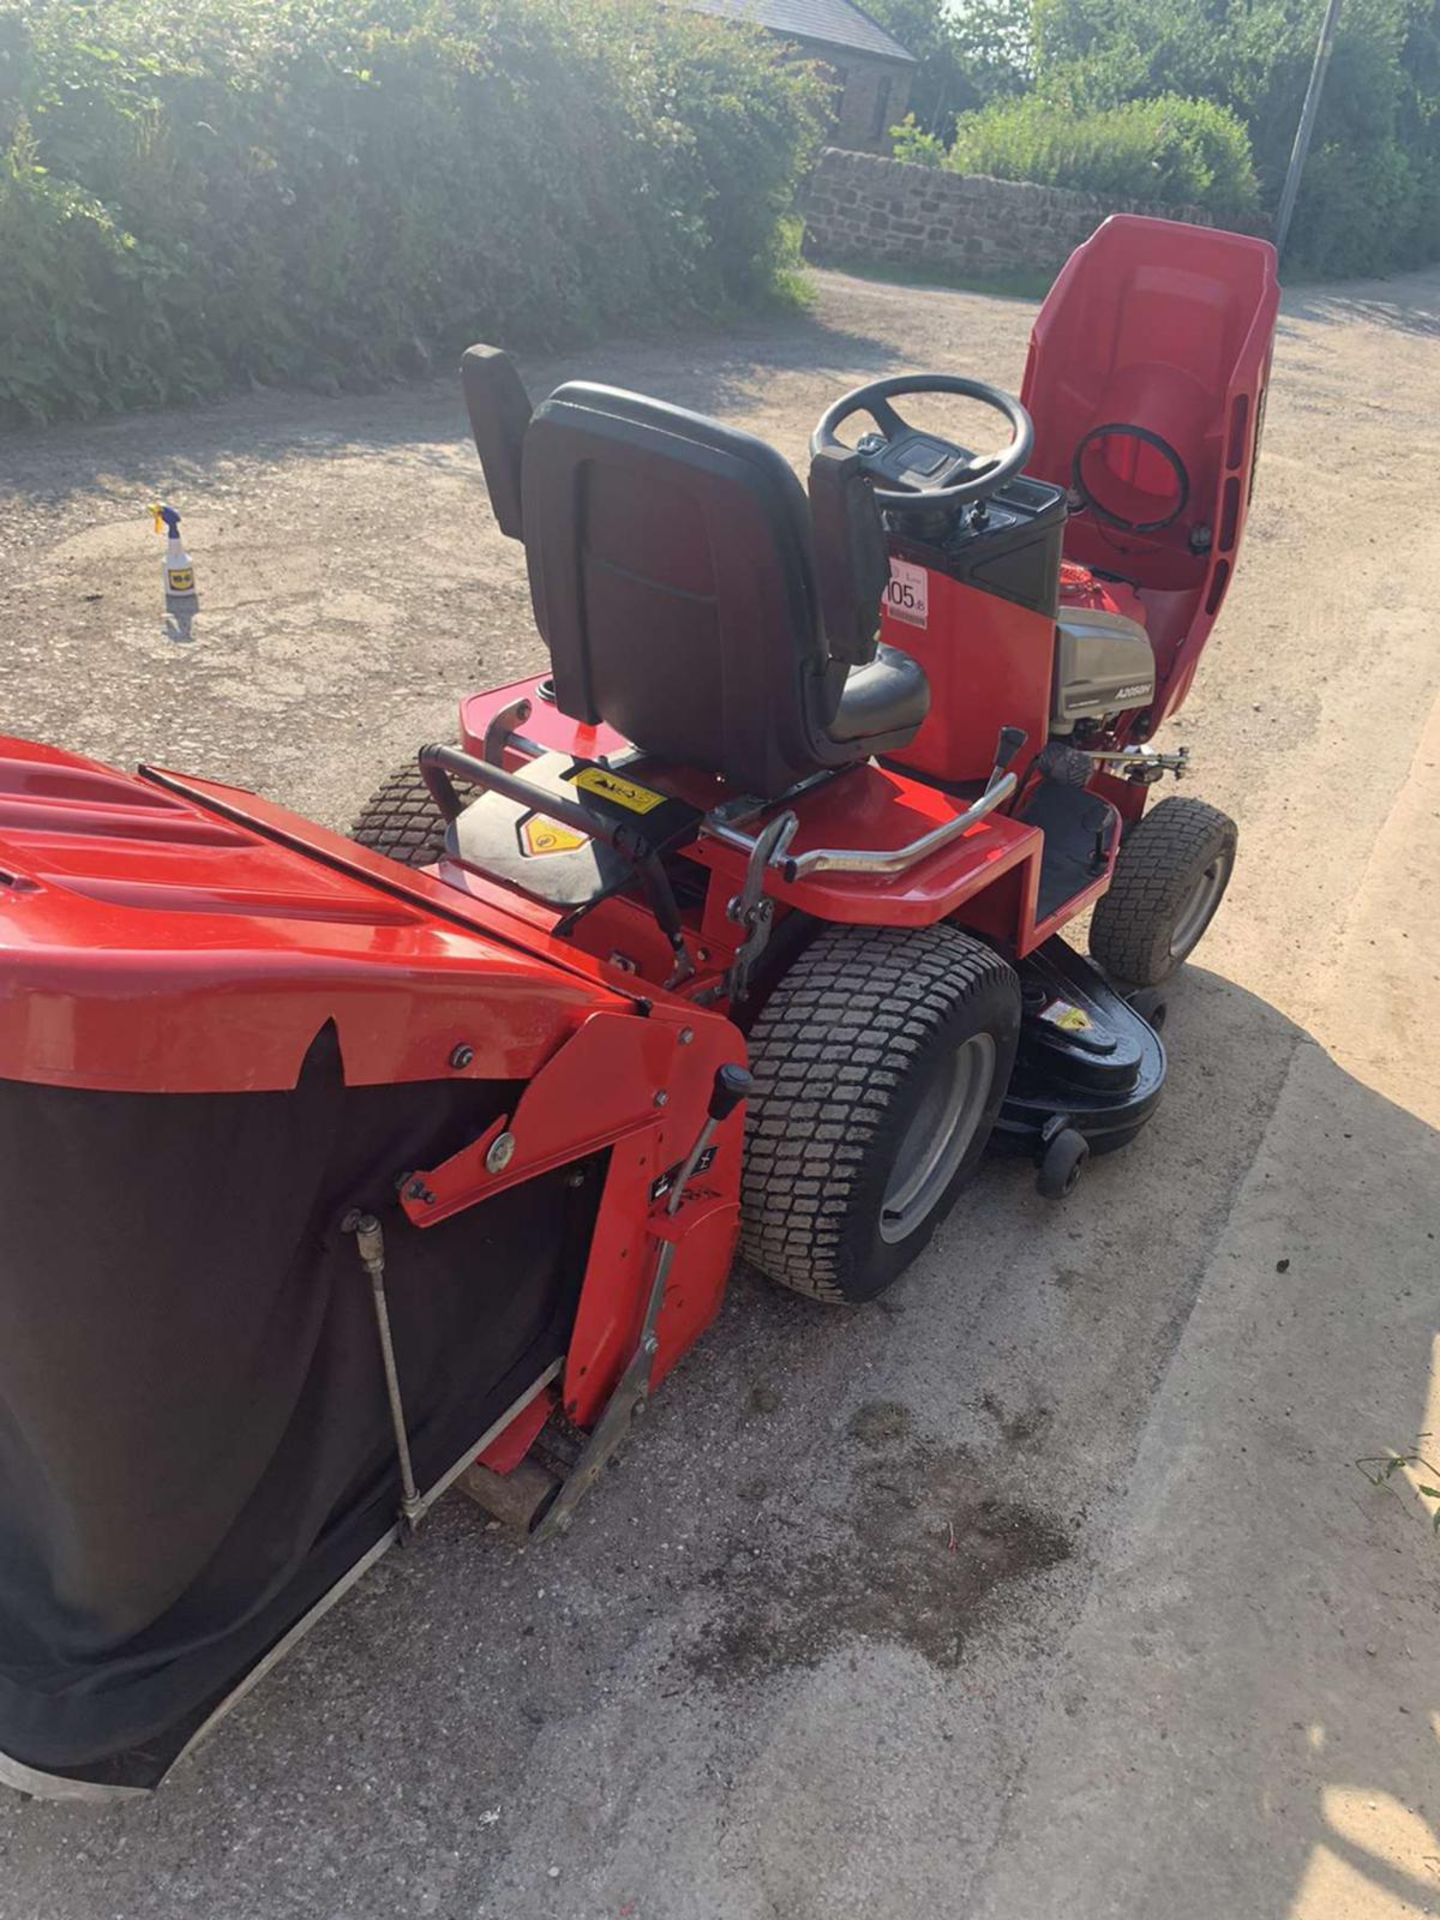 COUNTAX A20-50 RIDE ON LAWN MOWER, RUNS AND WORKS WELL, IN GOOD CONDITION *NO VAT* - Image 6 of 6